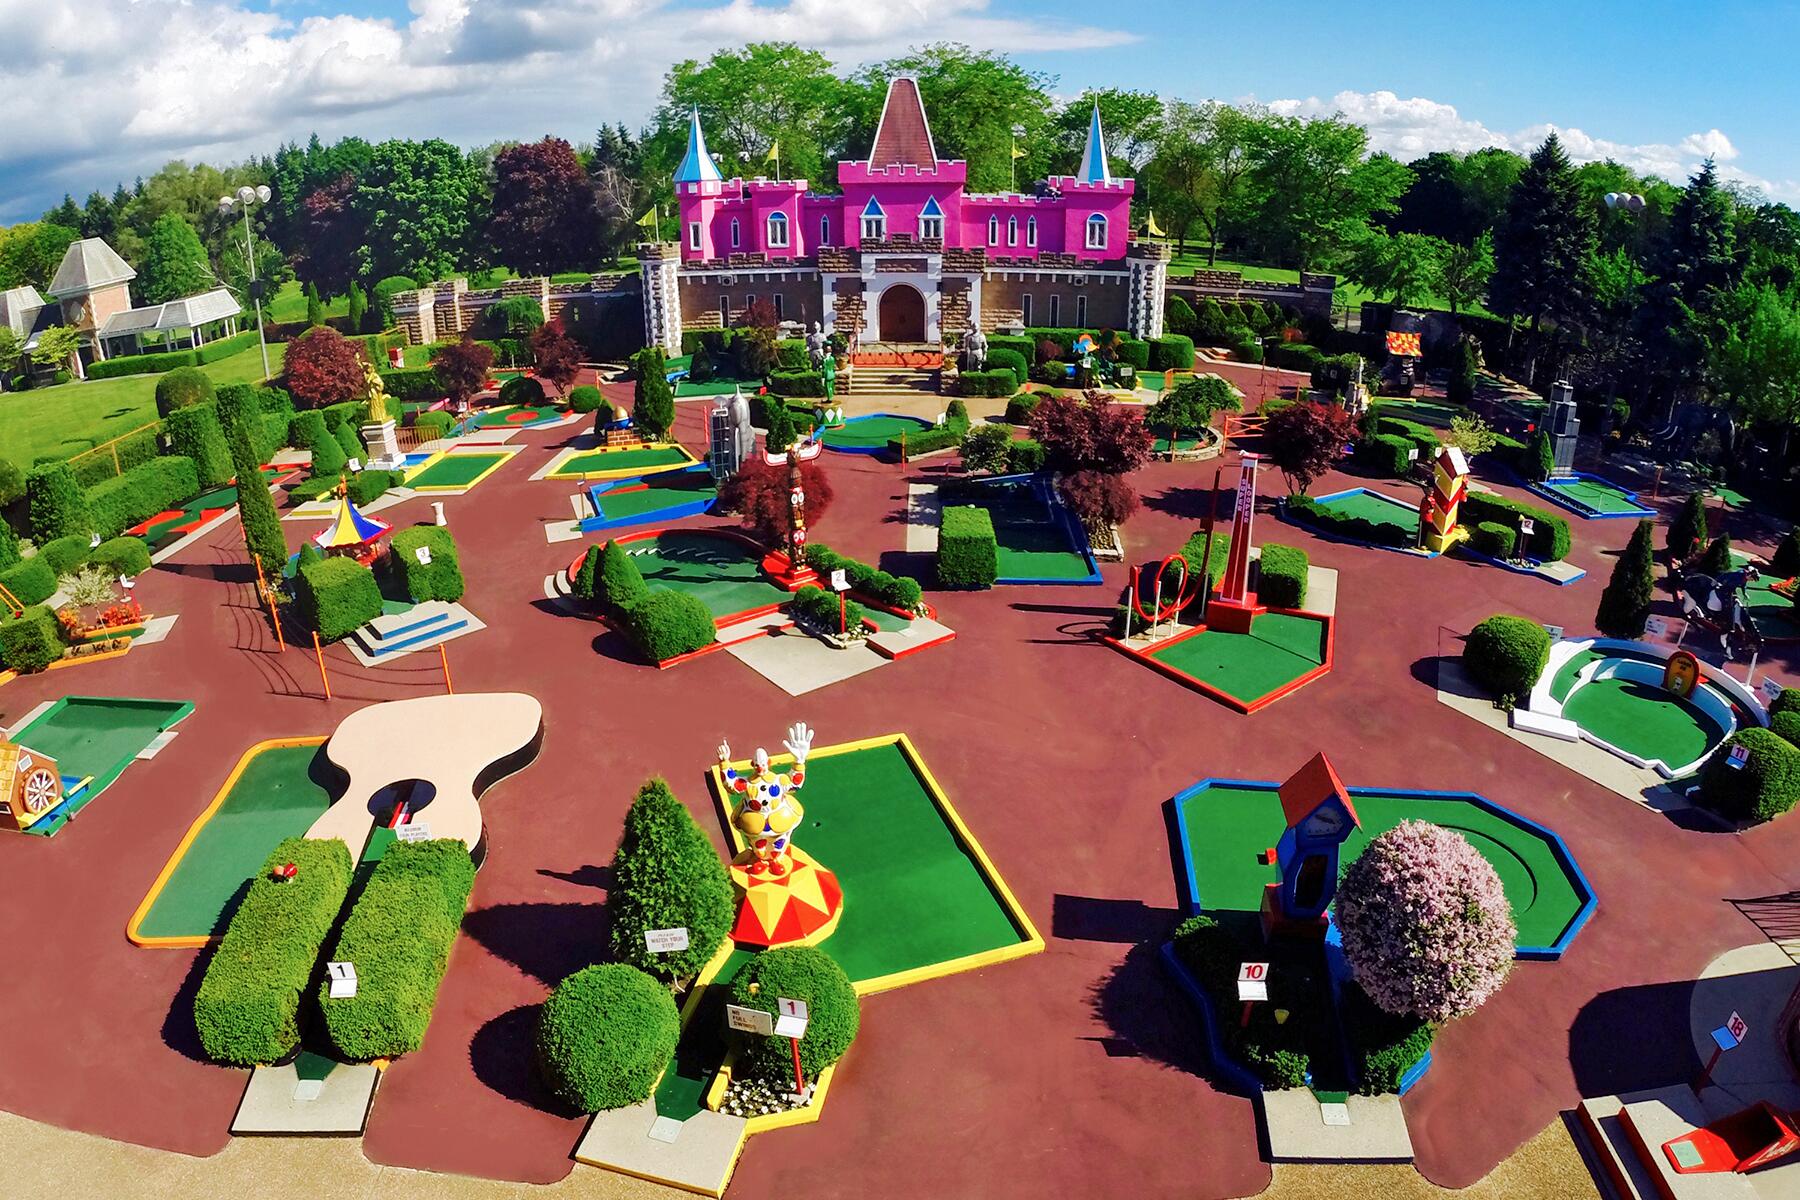 The Best and Most Outrageous Mini Golf Courses Across the U.S.